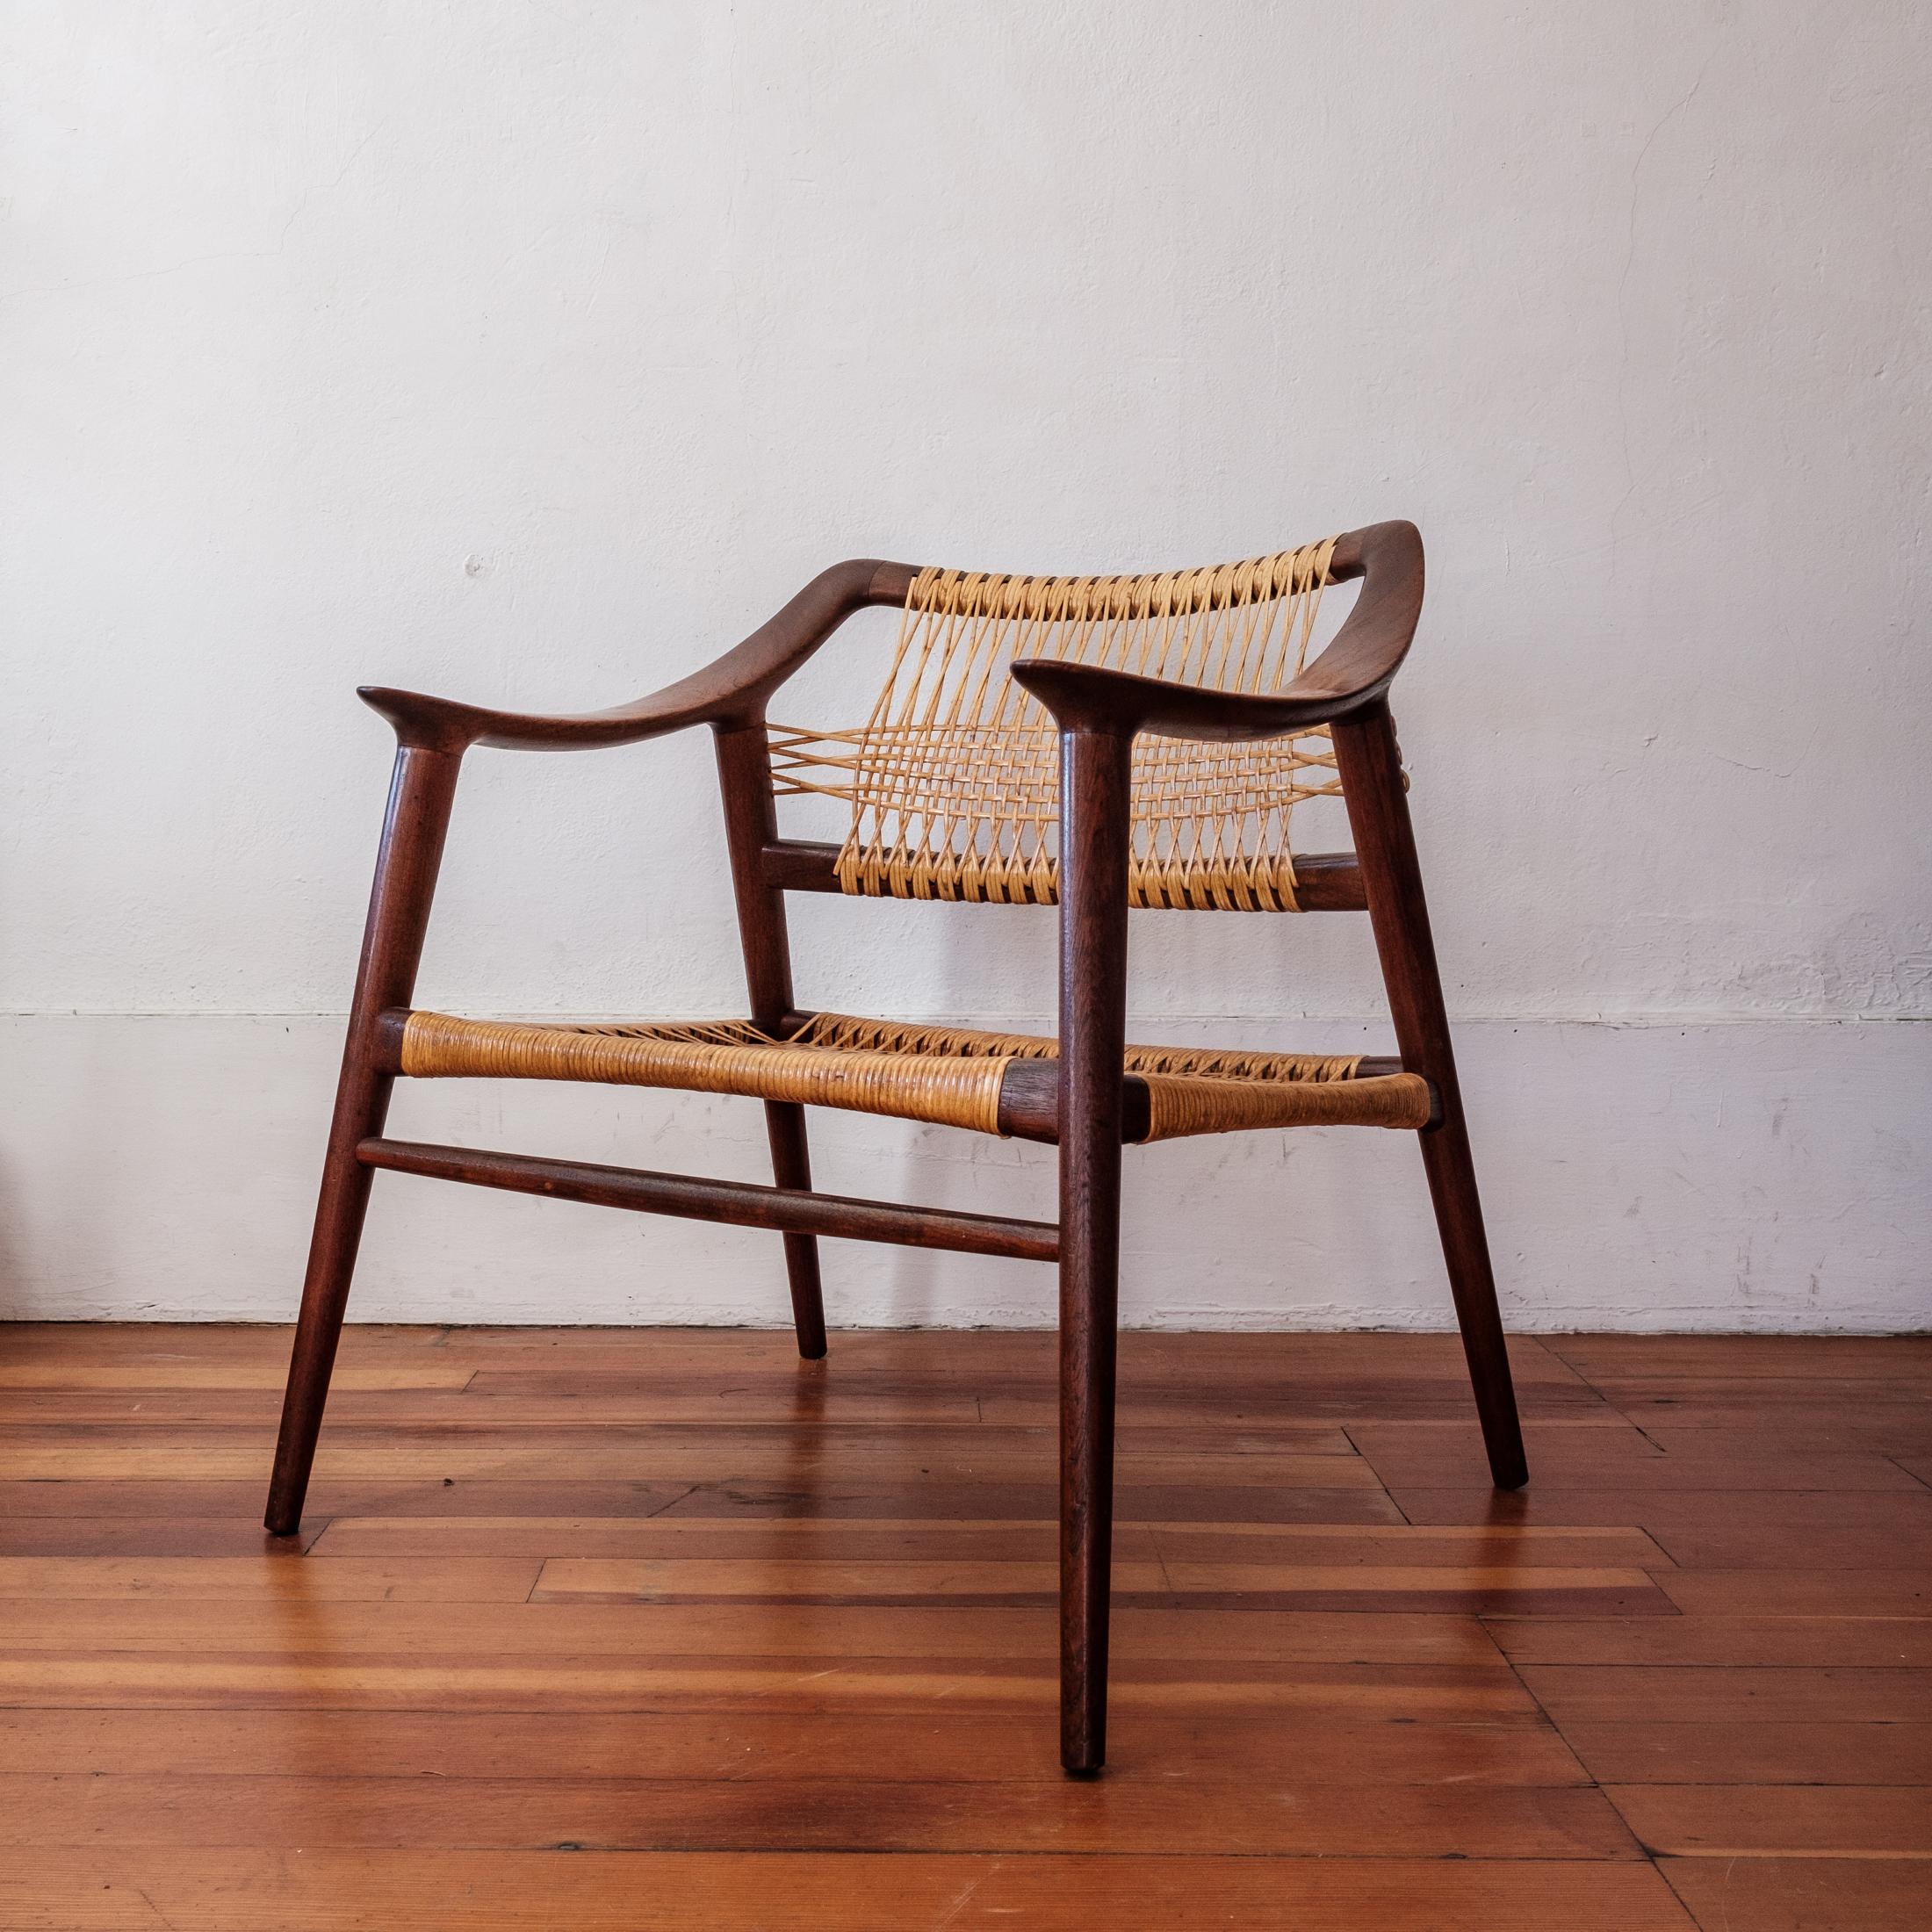 Rolf Rastad & Adolf Relling “Bambi” teak and cane chair. This is the more desirable low and wide lounge version. New professional caning. Gustav Bahus & Eft Norway, 1955-56. 

Literature: Norwegian Icons: Important Norwegian Design from the Era